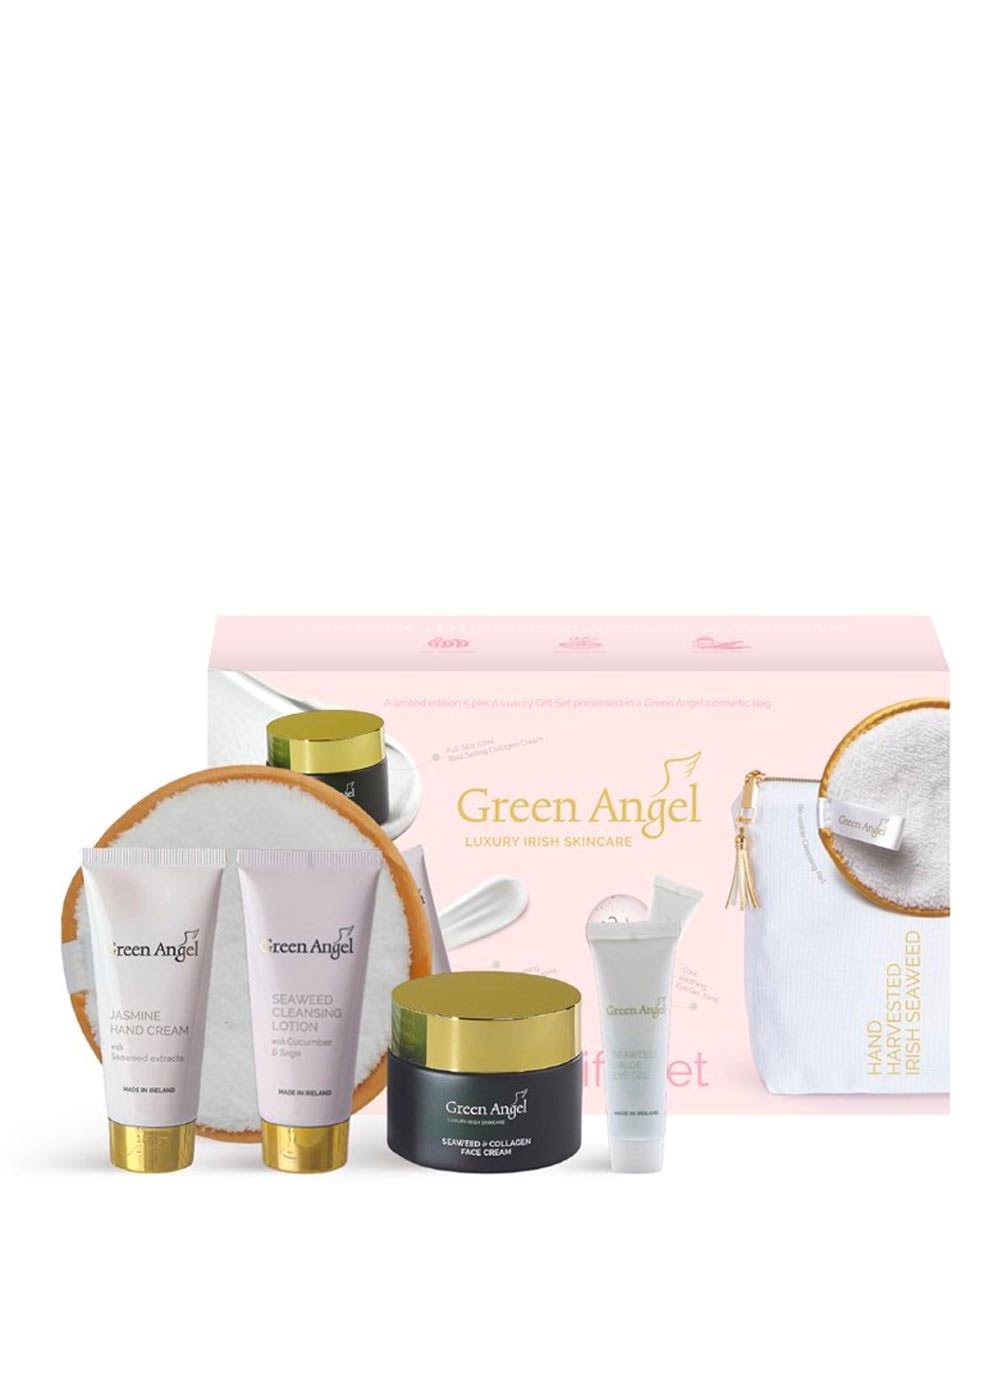 Green Angel Limited Edition Revival Gift Set